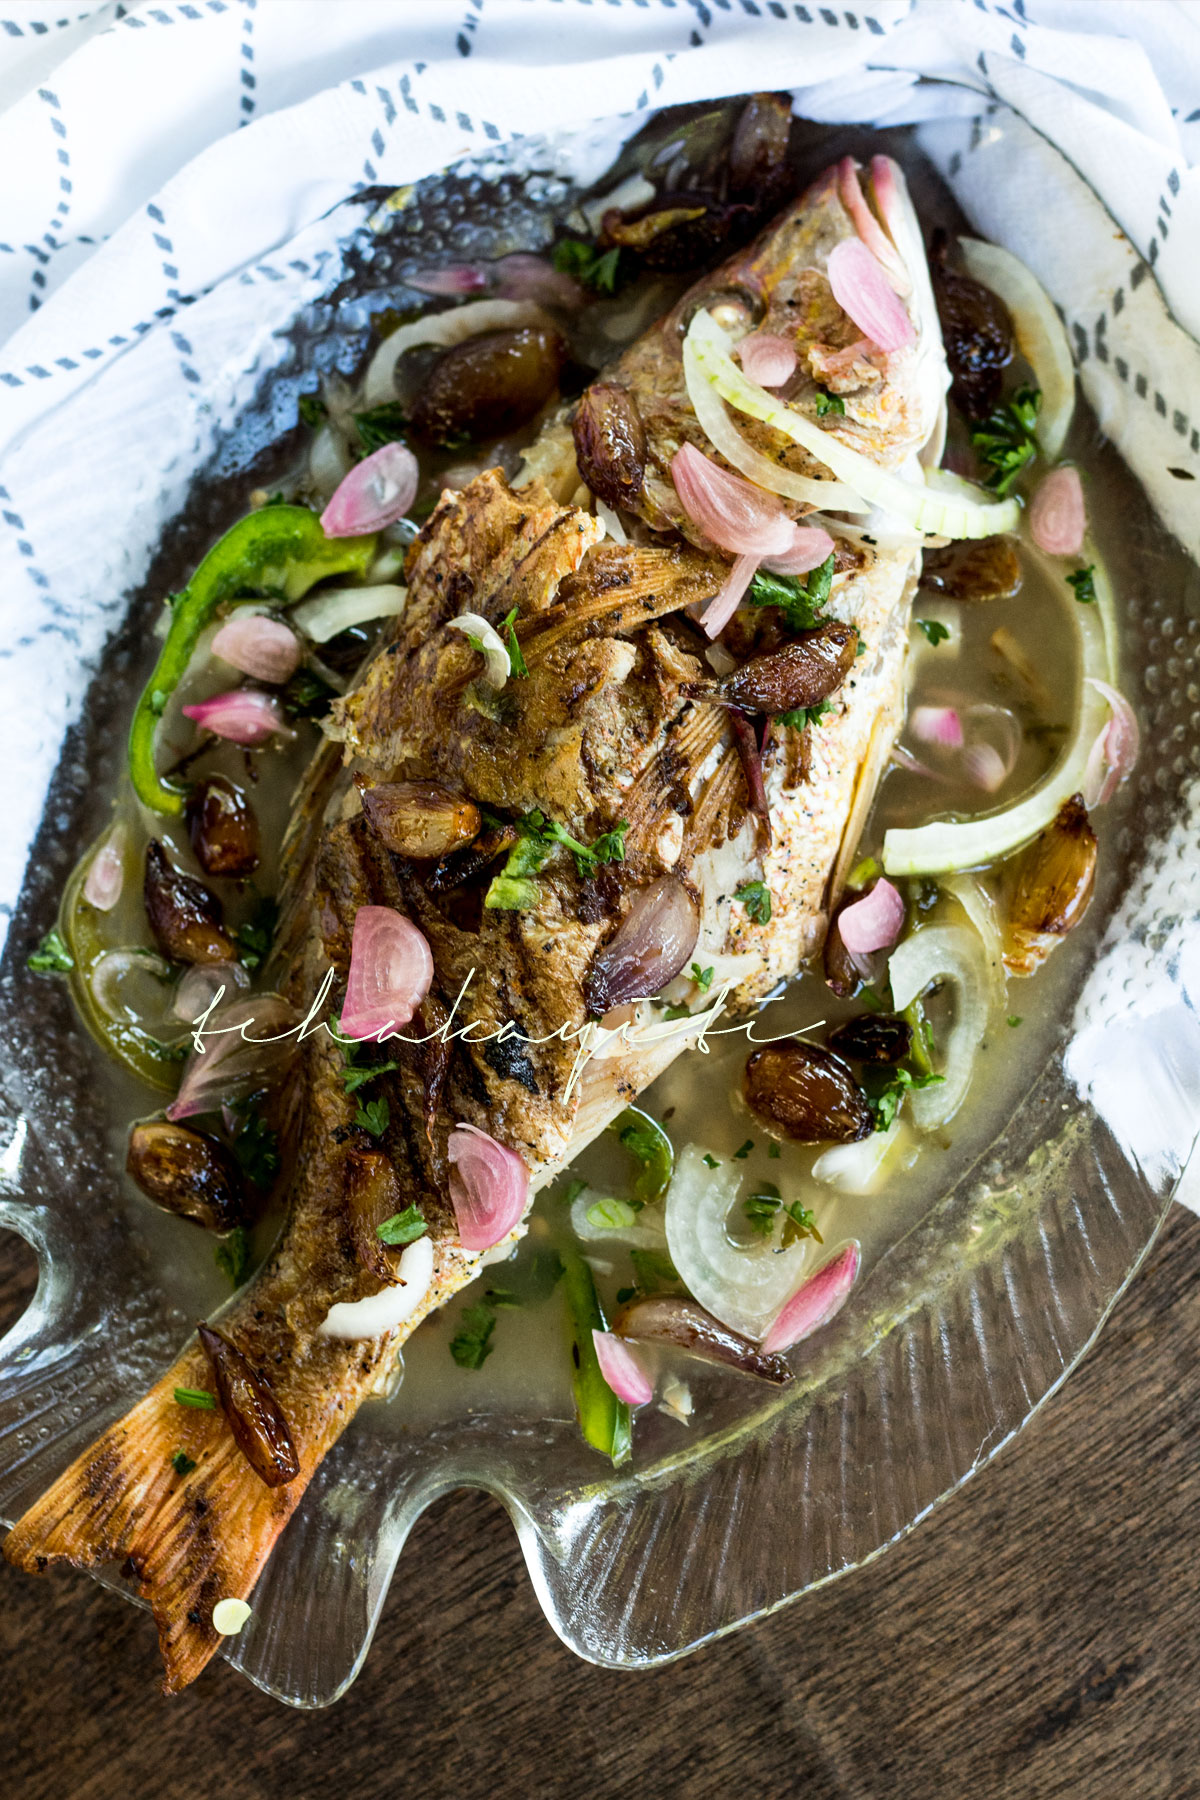 Poisson Gros Sel, a red snapper cooked in a court-bouillon with coarse salt, is a typical Haitian dish that is quite easy to make. Grab the recipe now. | tchakayiti.com